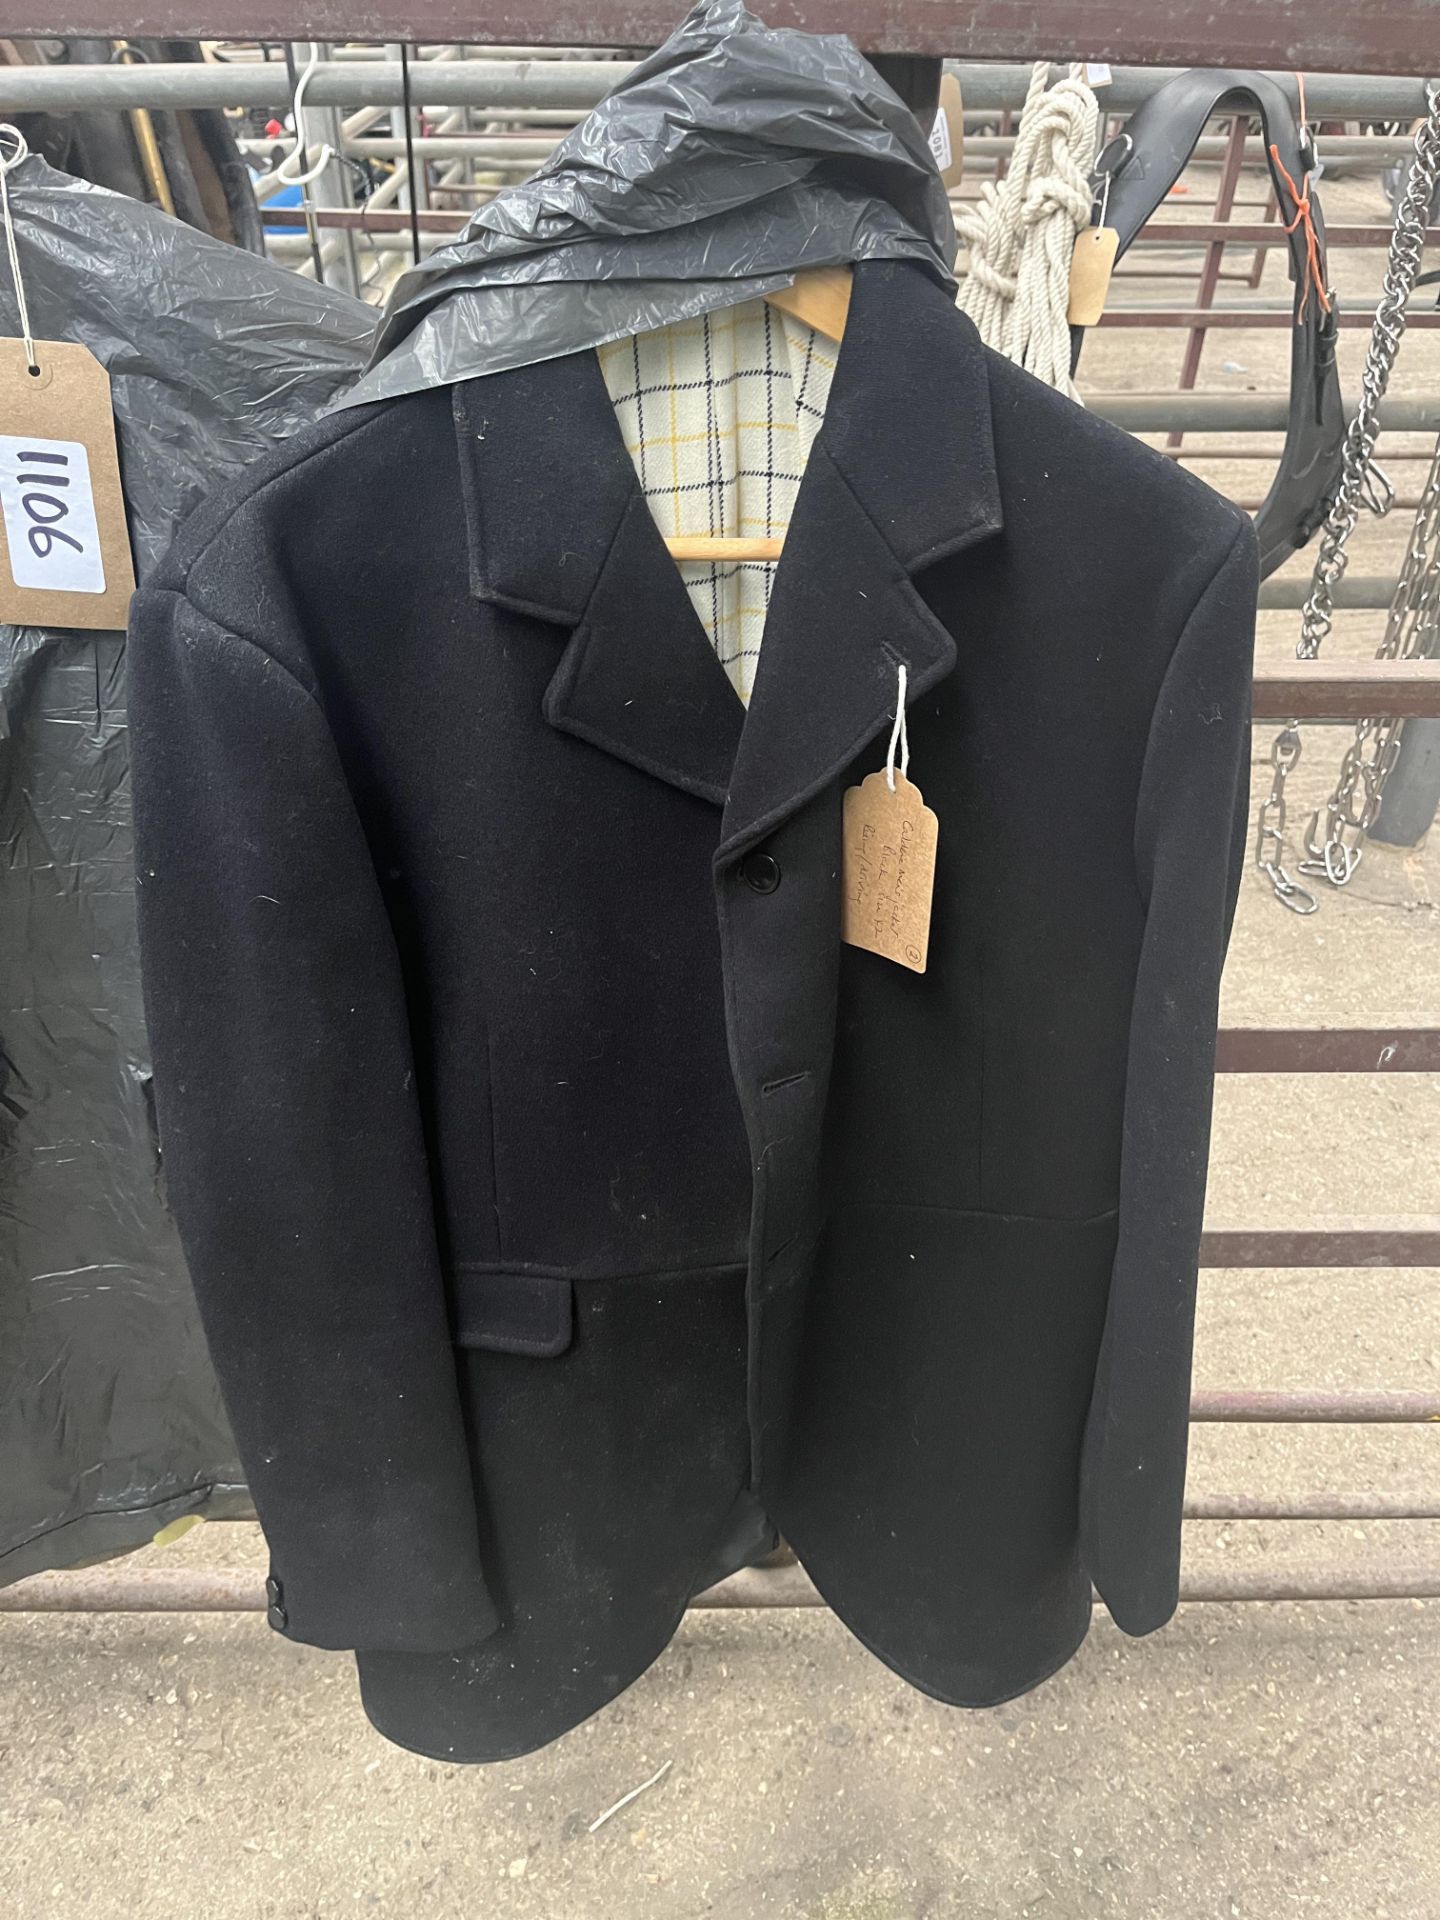 Men's short grey jacket, size large by Chums and a black men's riding jacket, size 42 - Image 3 of 3